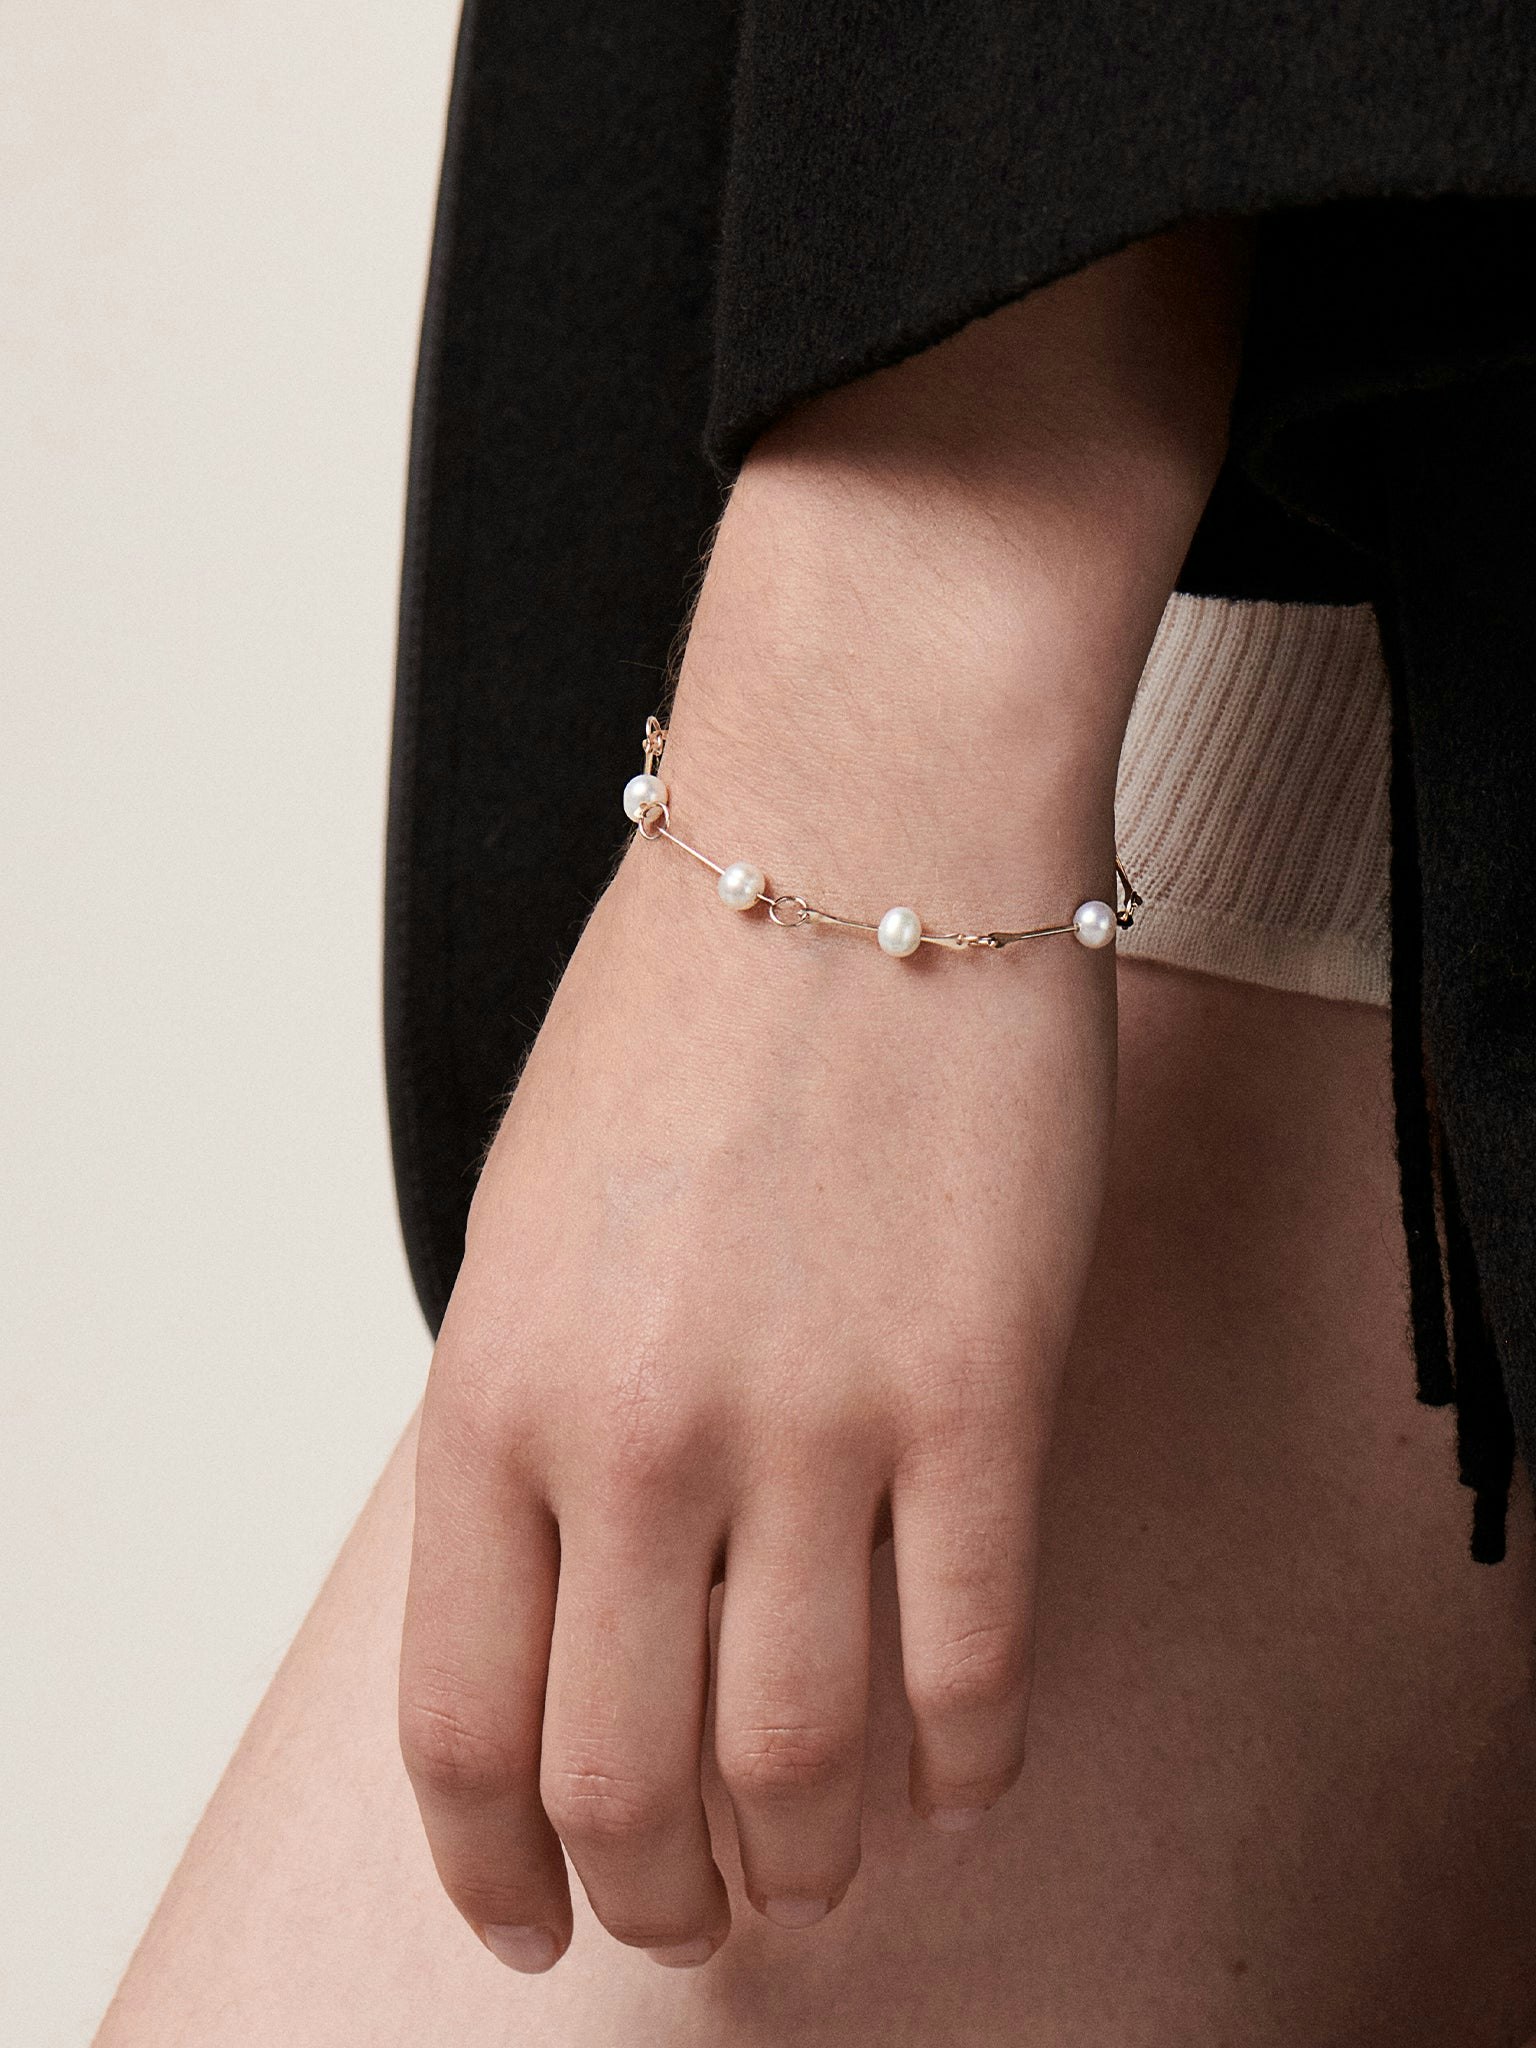 Bone chain bracelet with floating pearls photo 5